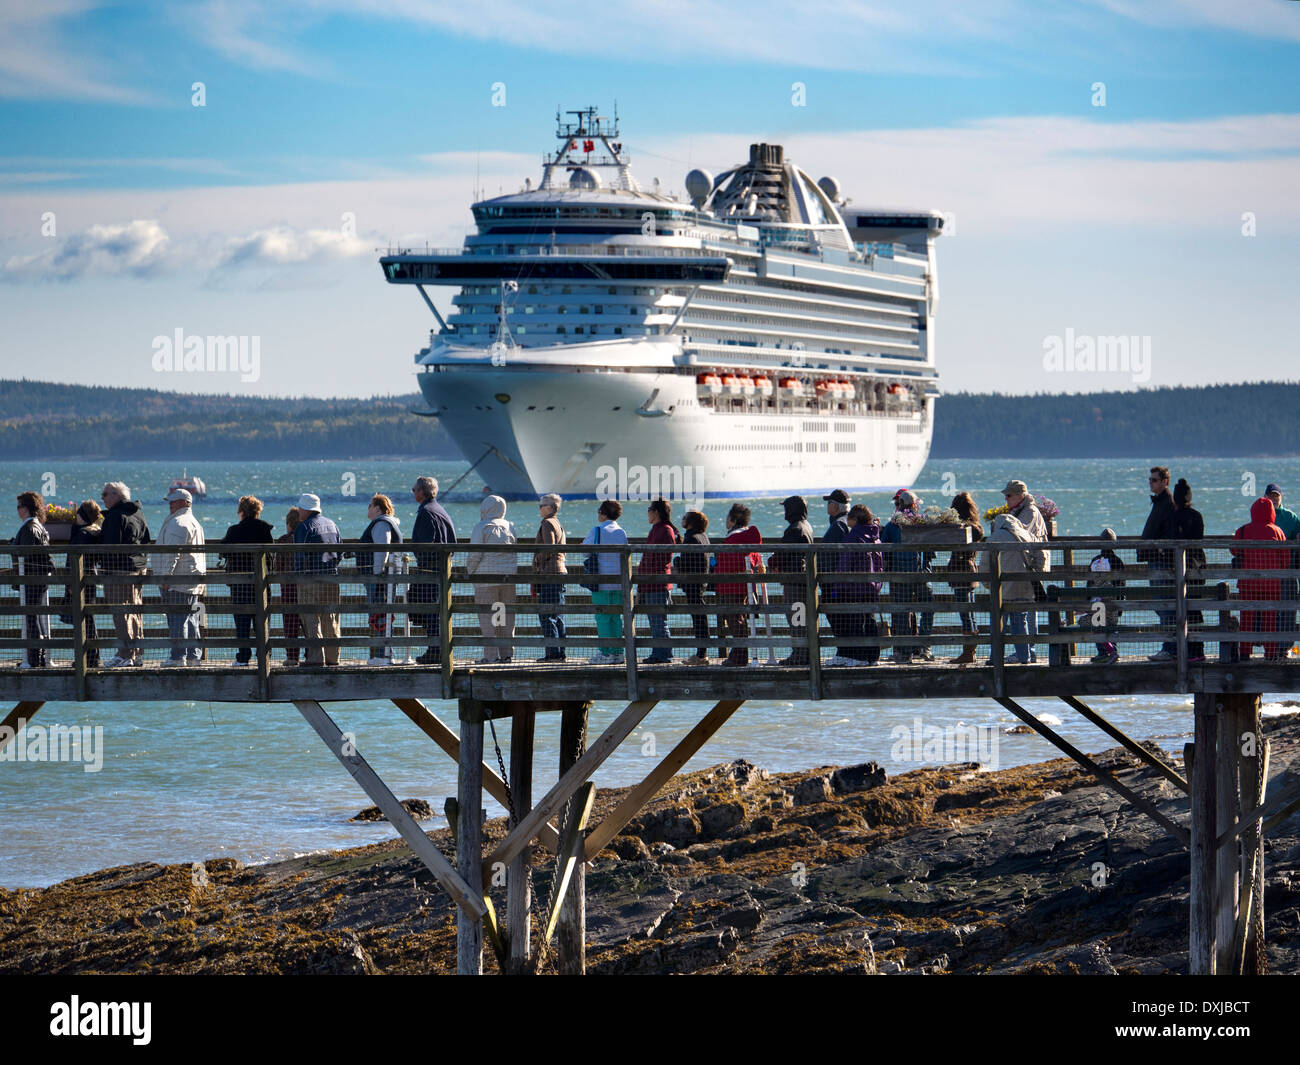 Cruise Liner Caribbean Princess moored off Bar Harbour Maine USA 9 Stock Photo